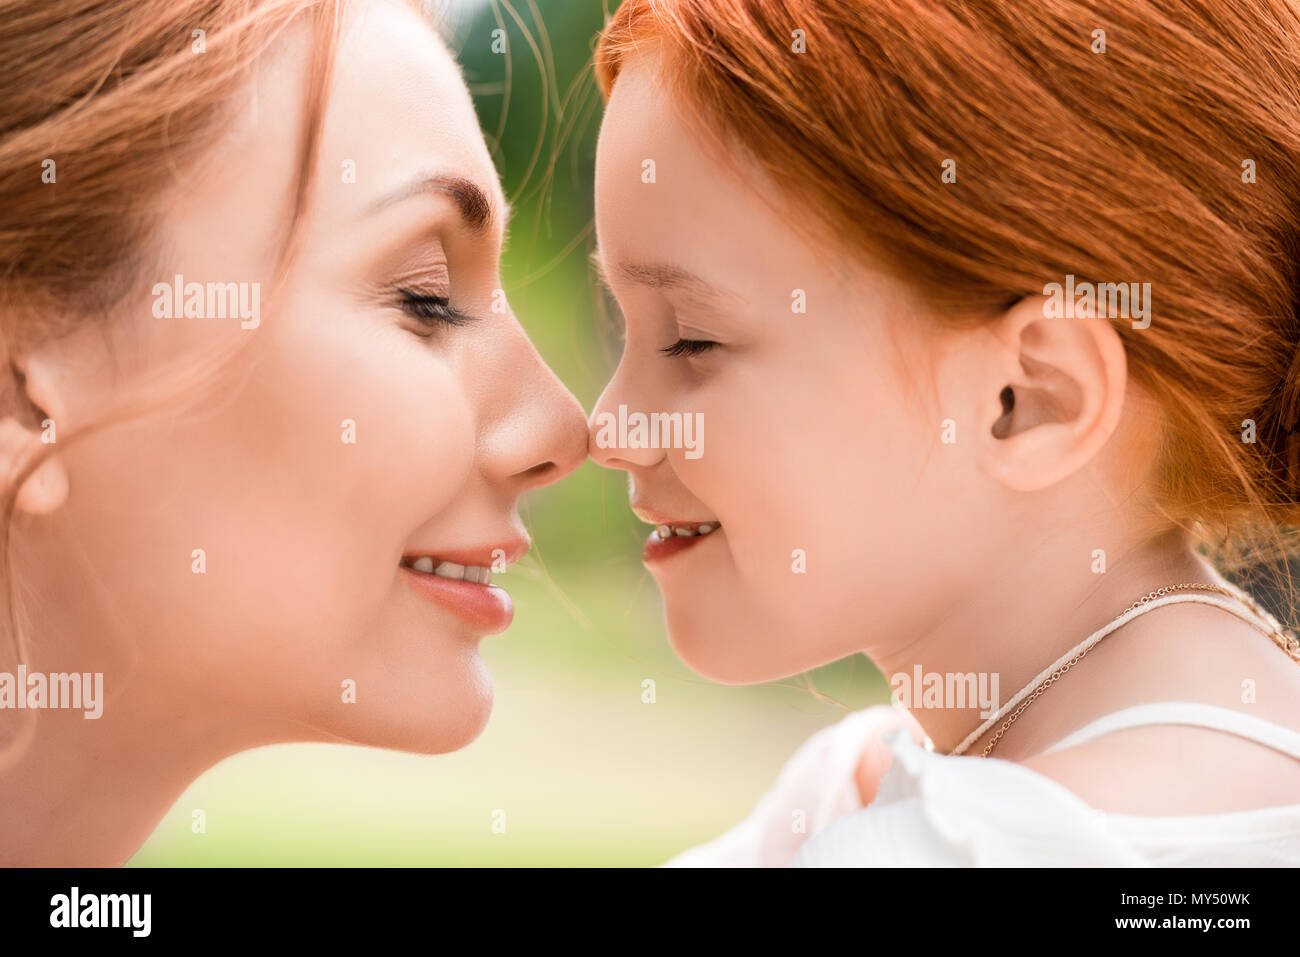 side view portrait of beautiful happy red haired mother and daughter touching noses at park Stock Photo